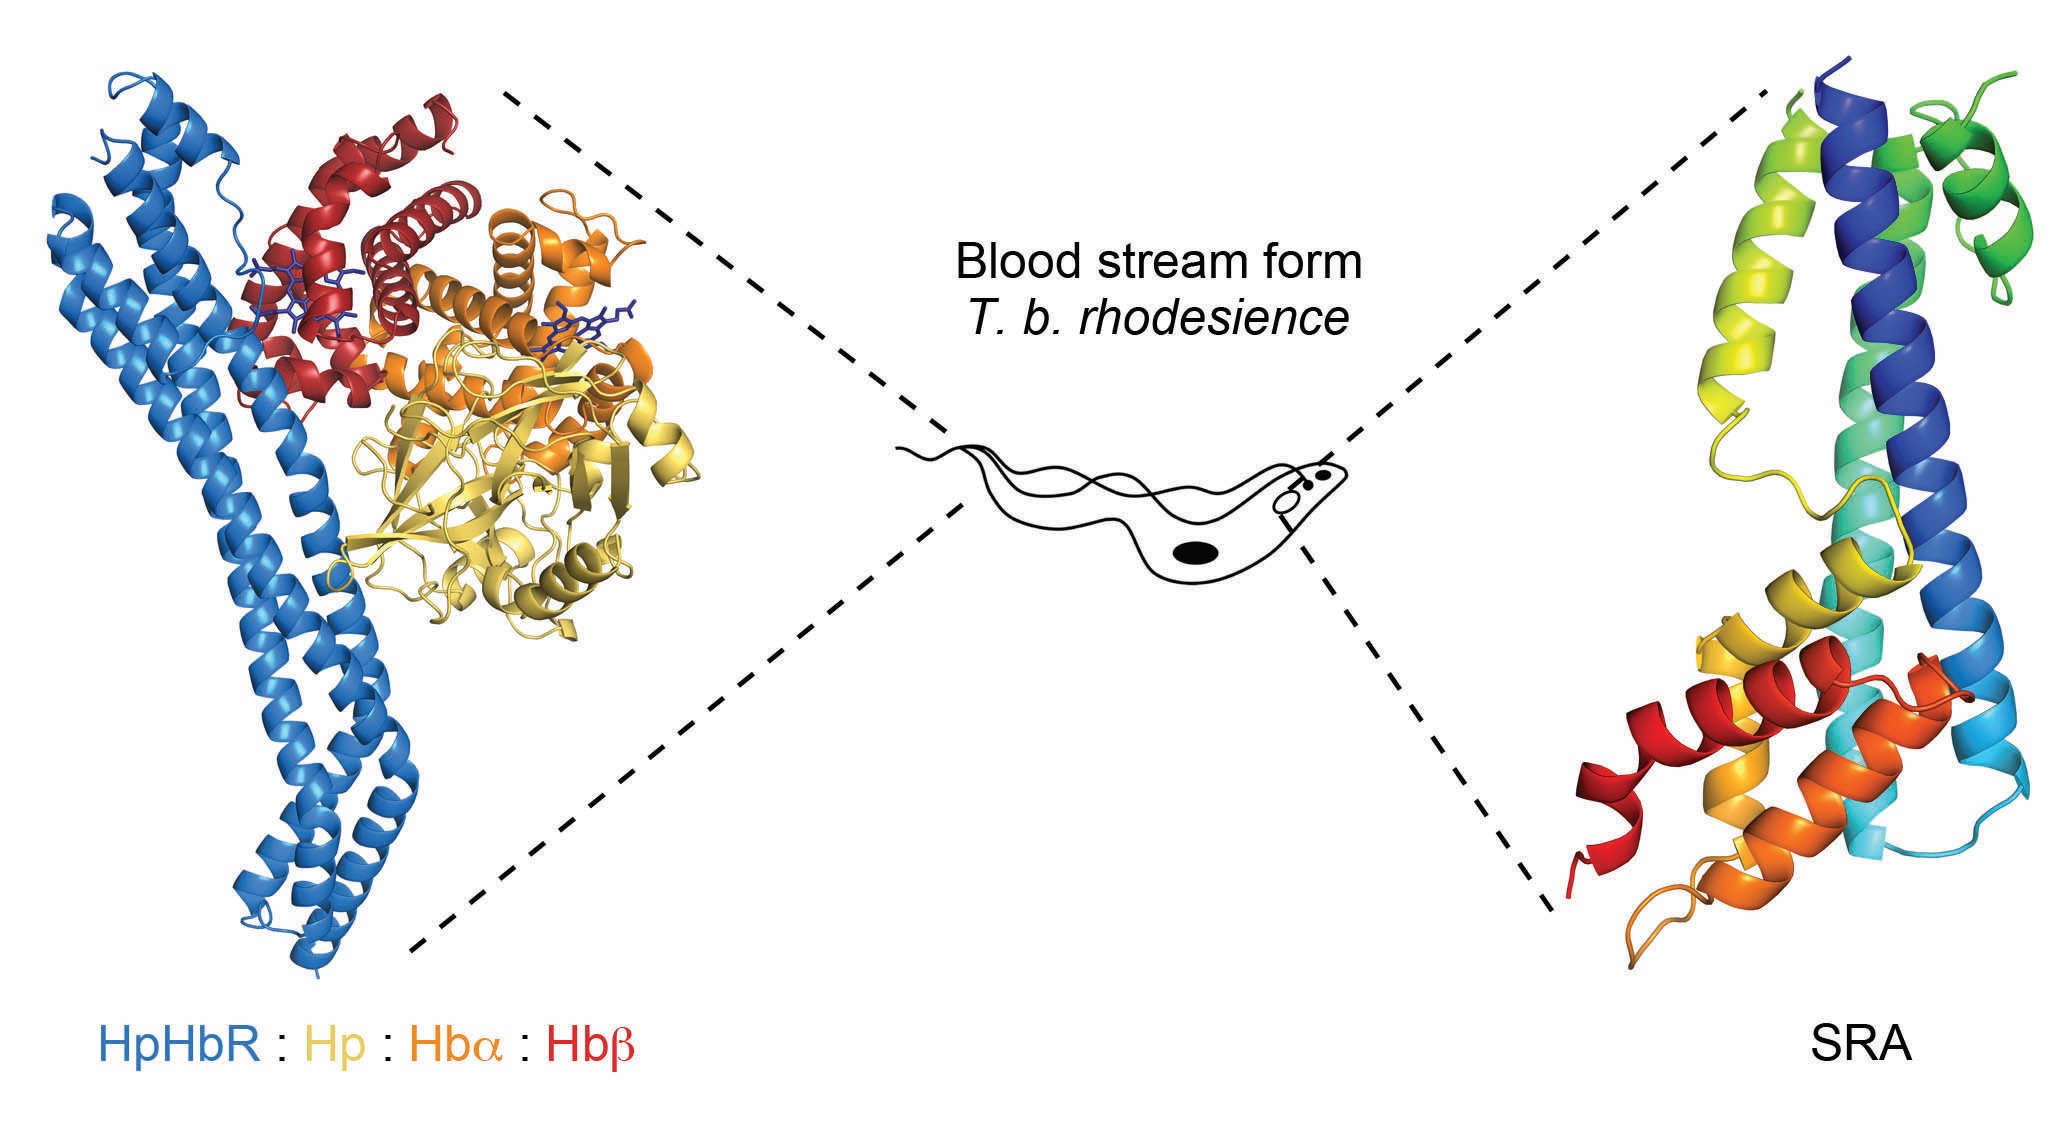 Figure: The centre of the Figure shows a schematic of a blood stream form T. b. brucei. The left-hand side of the figure shows the T. b. rhodesiense haptoglobin-haemoglobin receptor (HpHbR, blue) bound<br/>to a complex of the SP domain of haptoglobin (Hp, yellow), the a-subunit of haemoglobin (Hba, orange) and the b-subunit of haemoglobin (Hbb, red). This is found on the cell surface, and within the<br/>flagella pocket of trypanosomes. The right-hand panel shows the surface resistance associated protein (SRA, rainbow) of T. b. rhodesiense, which is found primarily in the lysosome of trypanosomes.